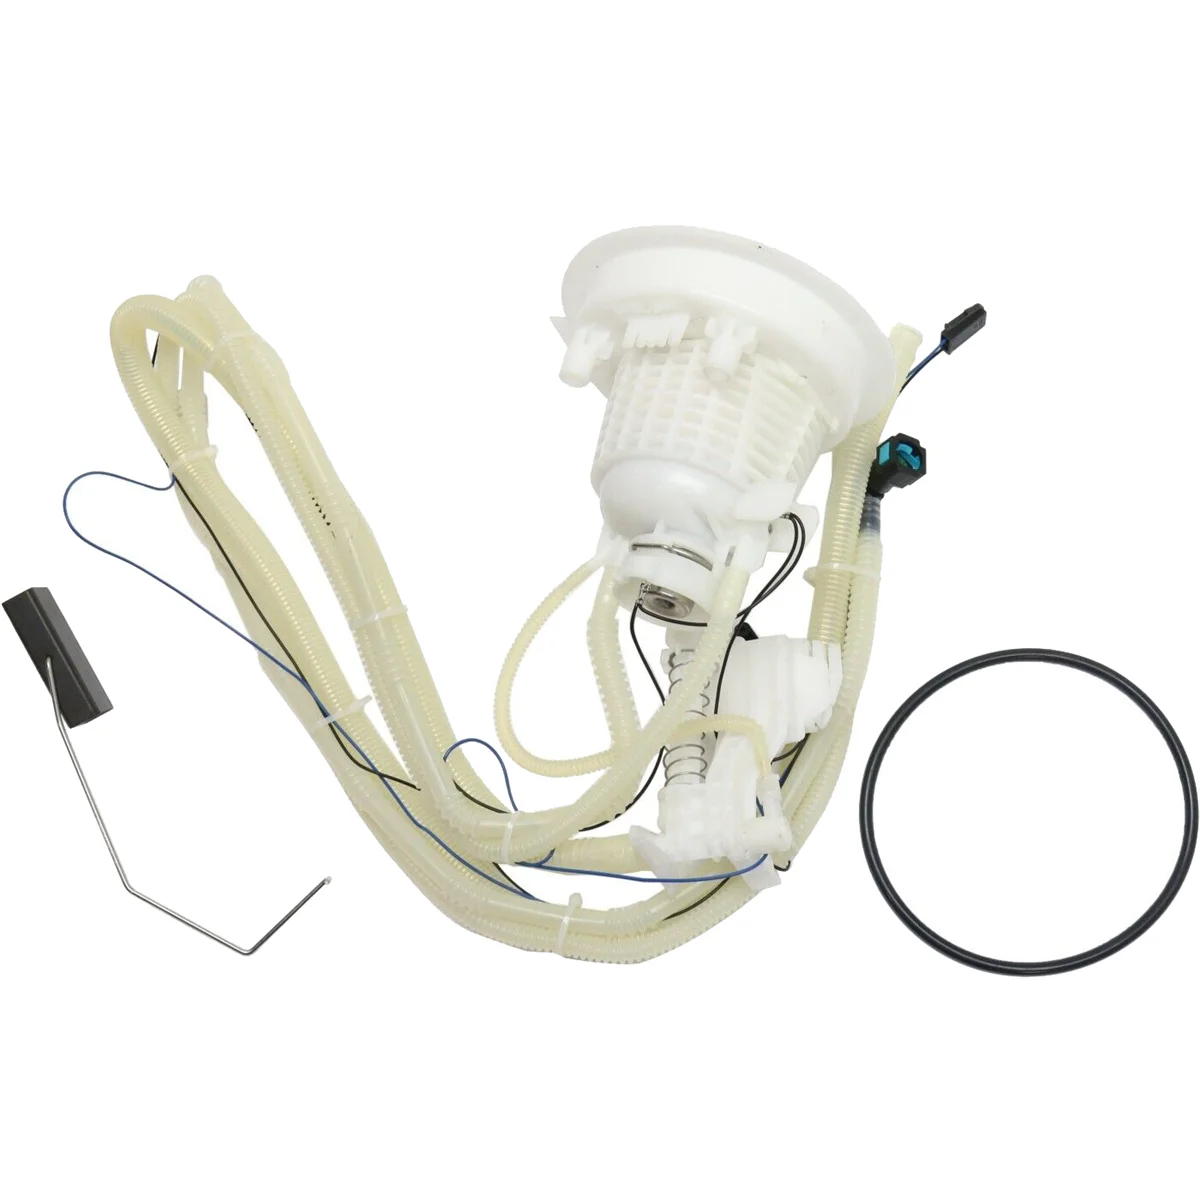 

E7264A Fuel Pump for Chrysler 300 Magnum Charger Challenger 2005-2010 with Sending Unit